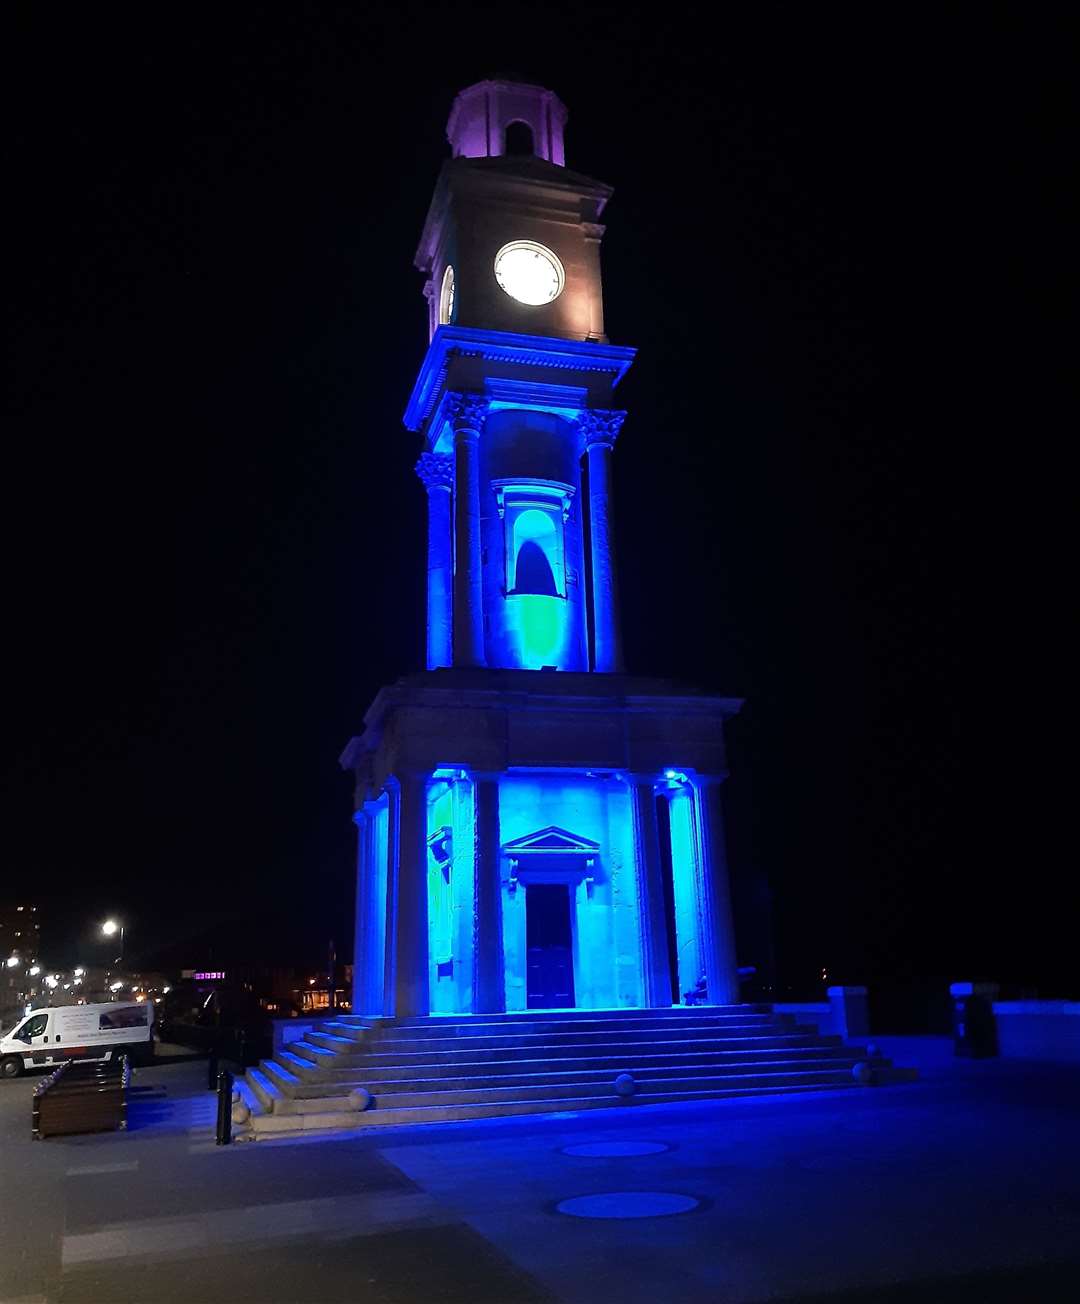 The Herne Bay clock tower lit up (32468973)